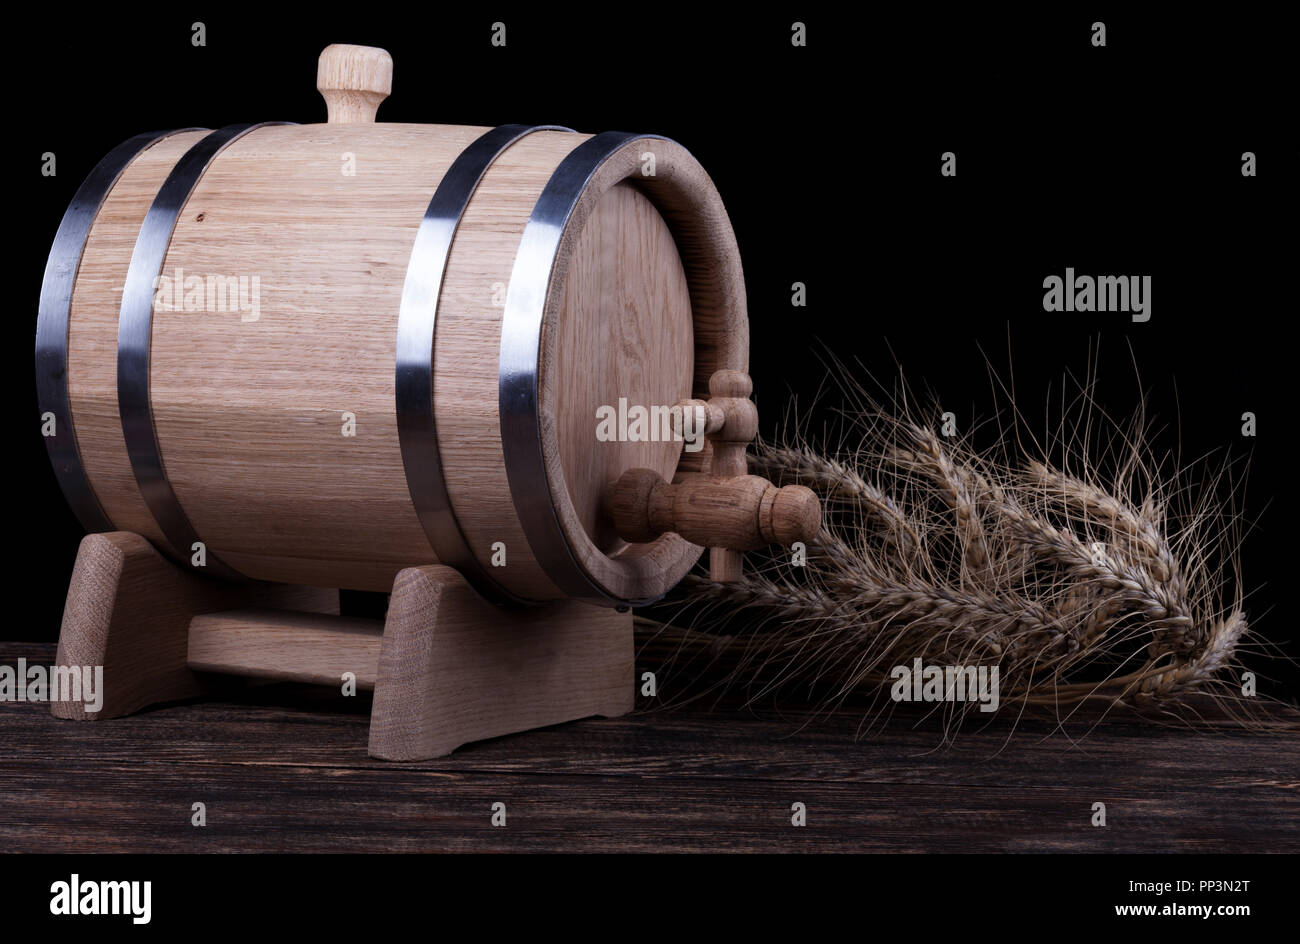 Wooden barrel with rye crops on wooden table close up Stock Photo